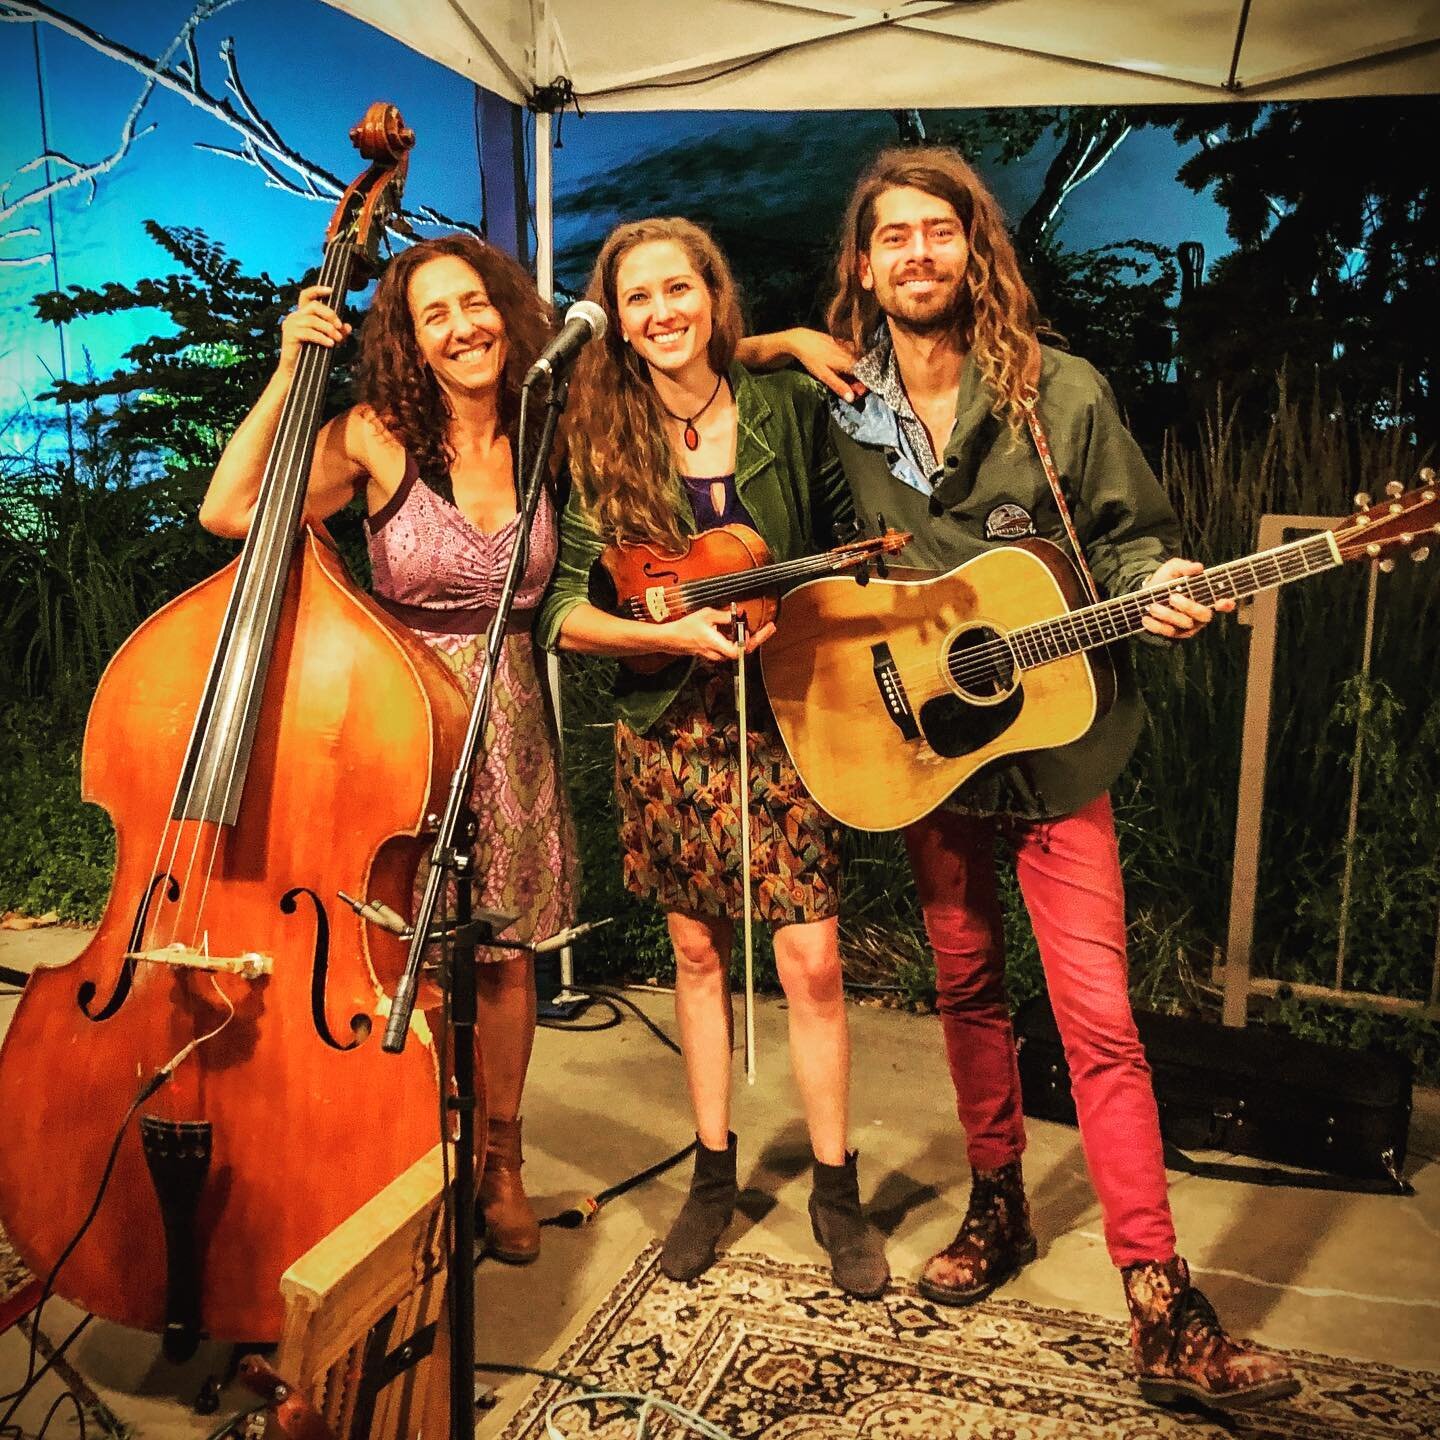 Such a beautiful time last night at the @arvadacenter Front Porch Series! Big thank you to @dazzlepresents and everyone who came out to enjoy the evening with us! 

See you tonight at @atinfinitypark in Glendale, CO! Show starts at 4pm 🎶❤️🌈